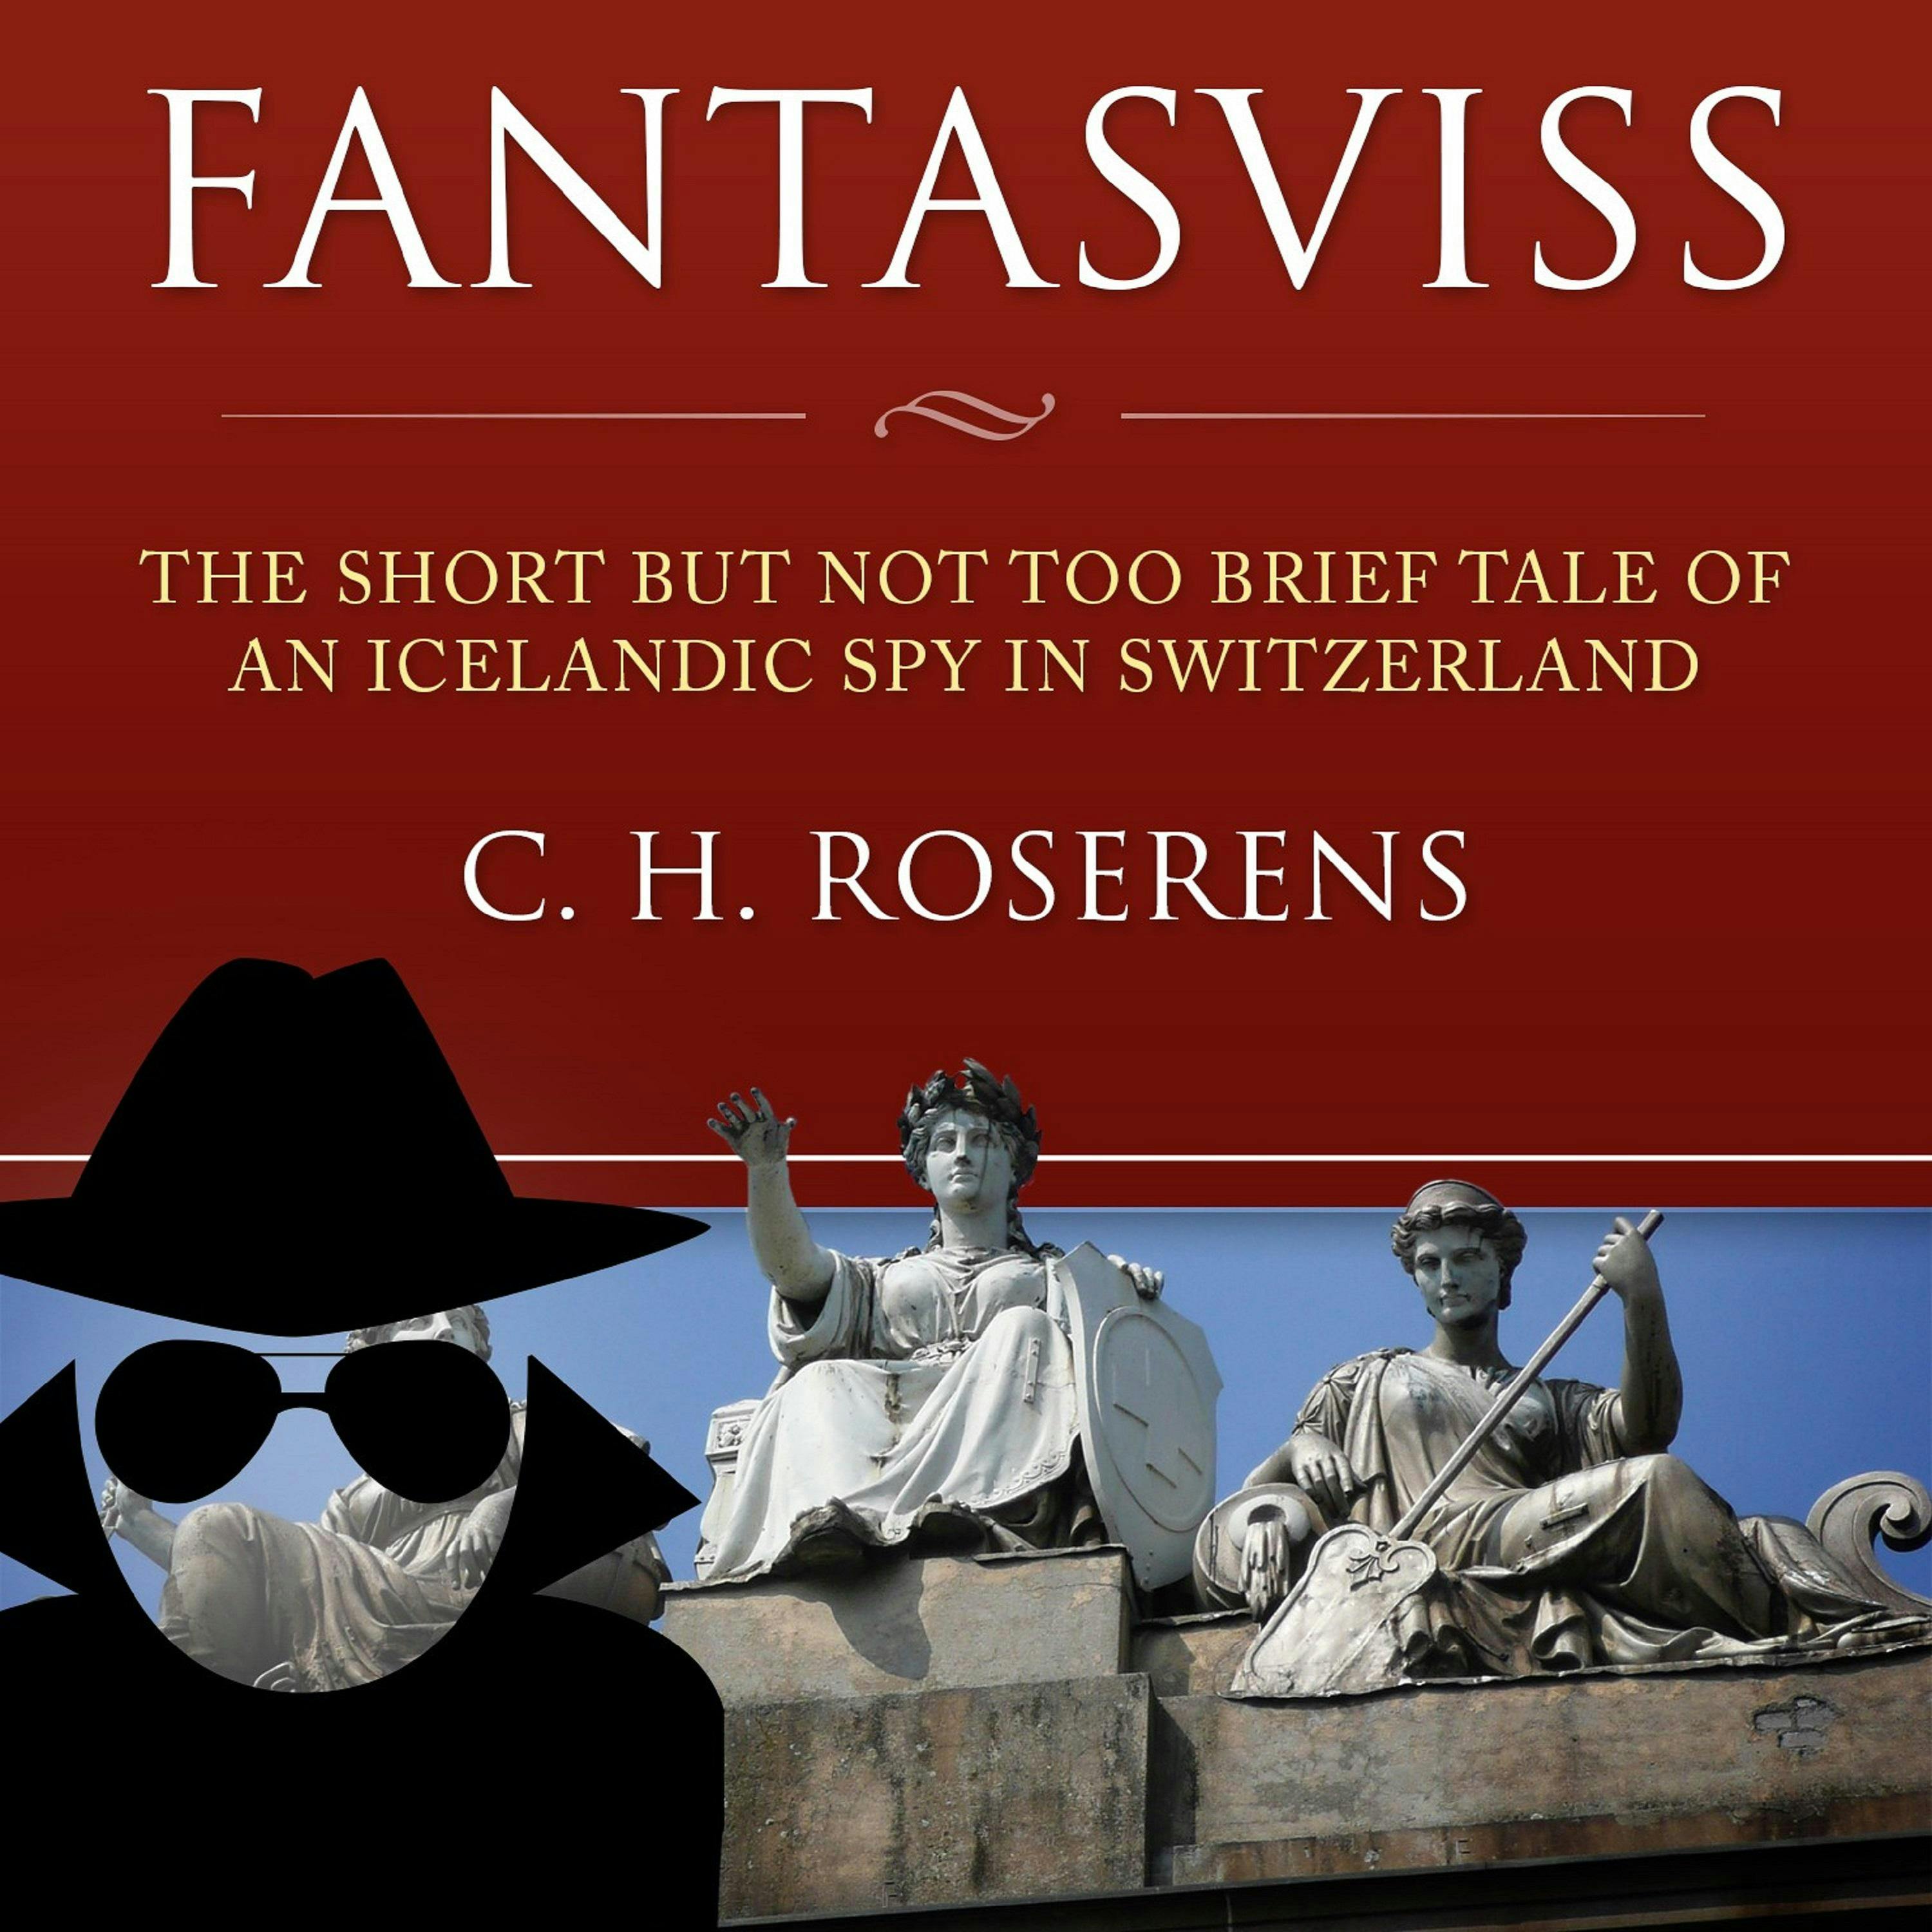 Fantasviss: The Short but not too Brief Tale of an Icelandic Spy in Switzerland - C.H. Roserens